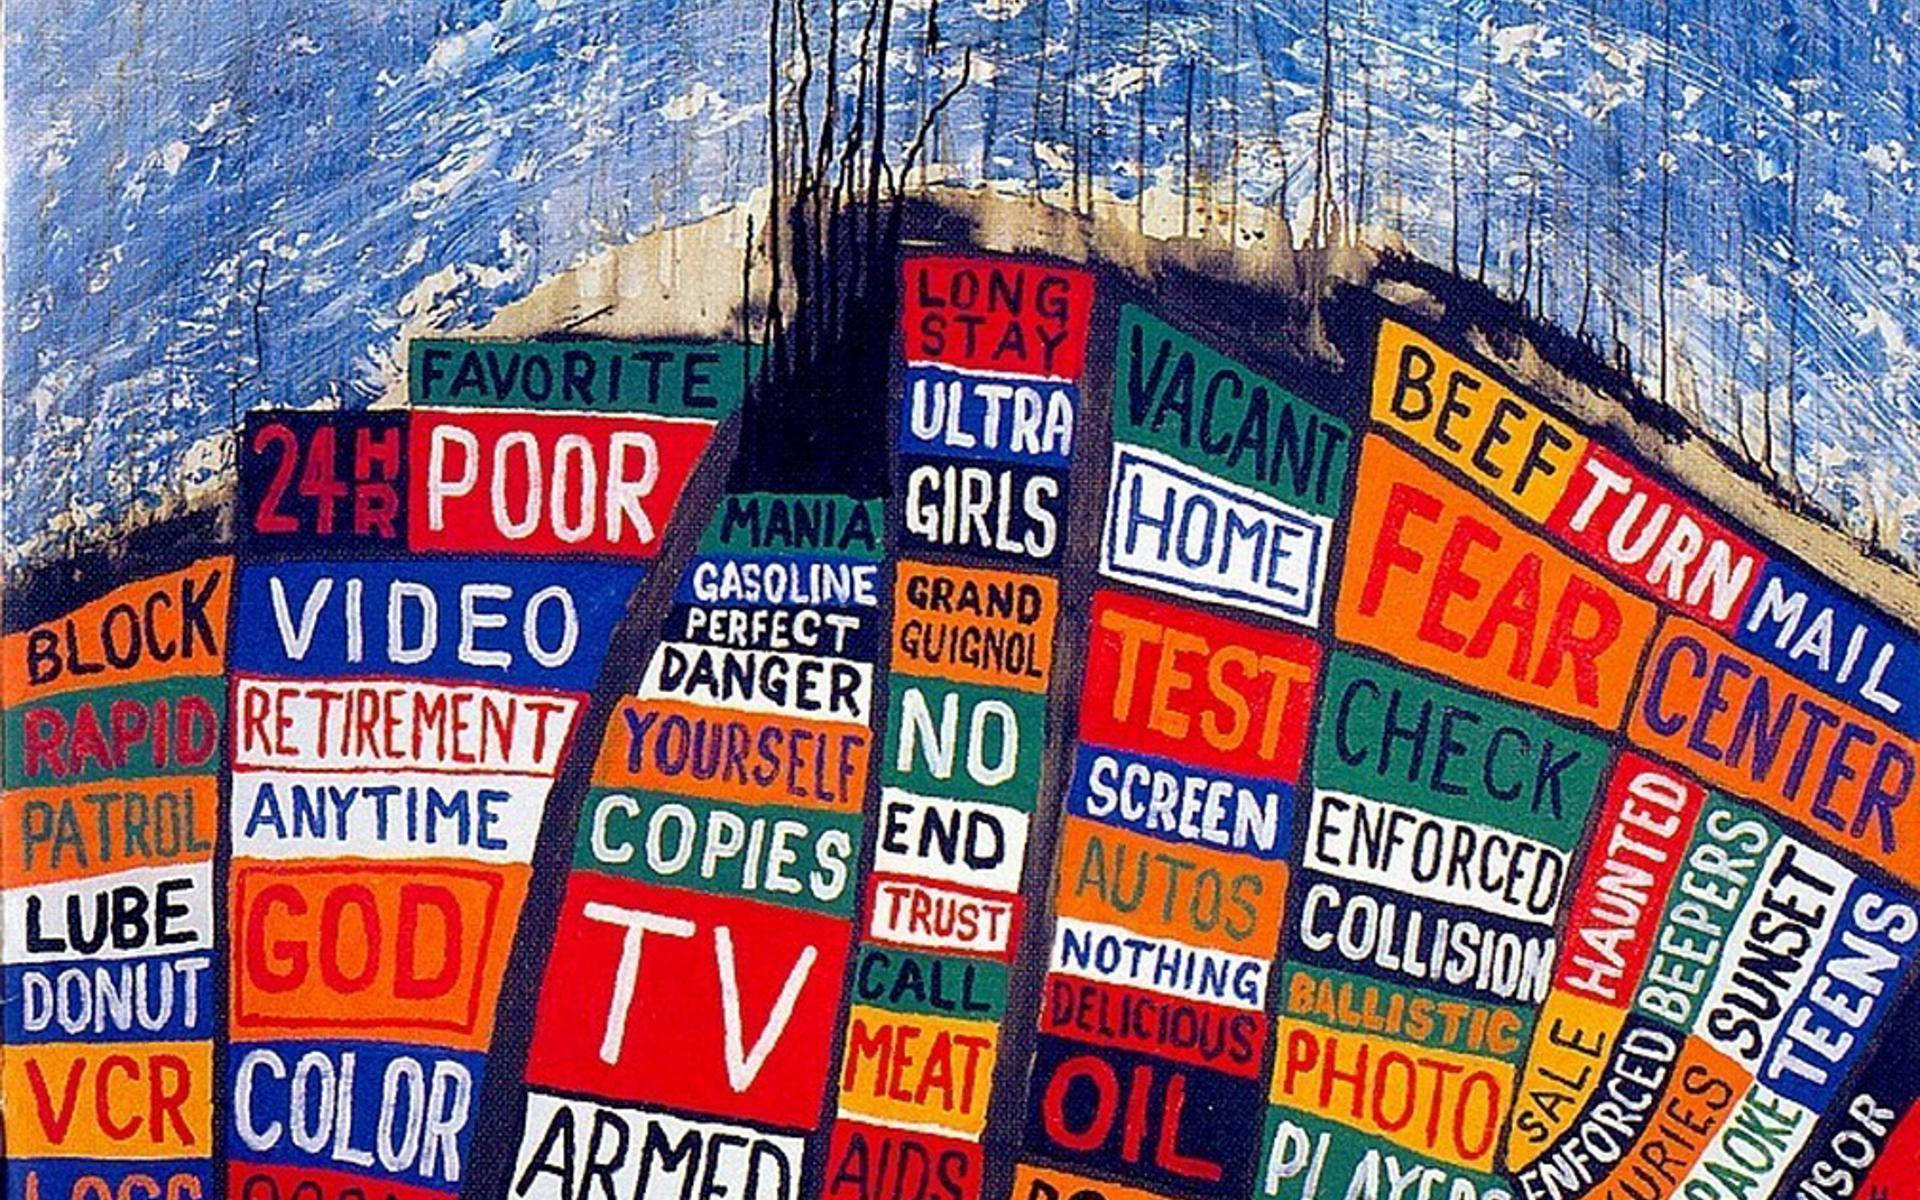 The Art of Music - Radiohead's Hail to the Thief Album Cover Wallpaper